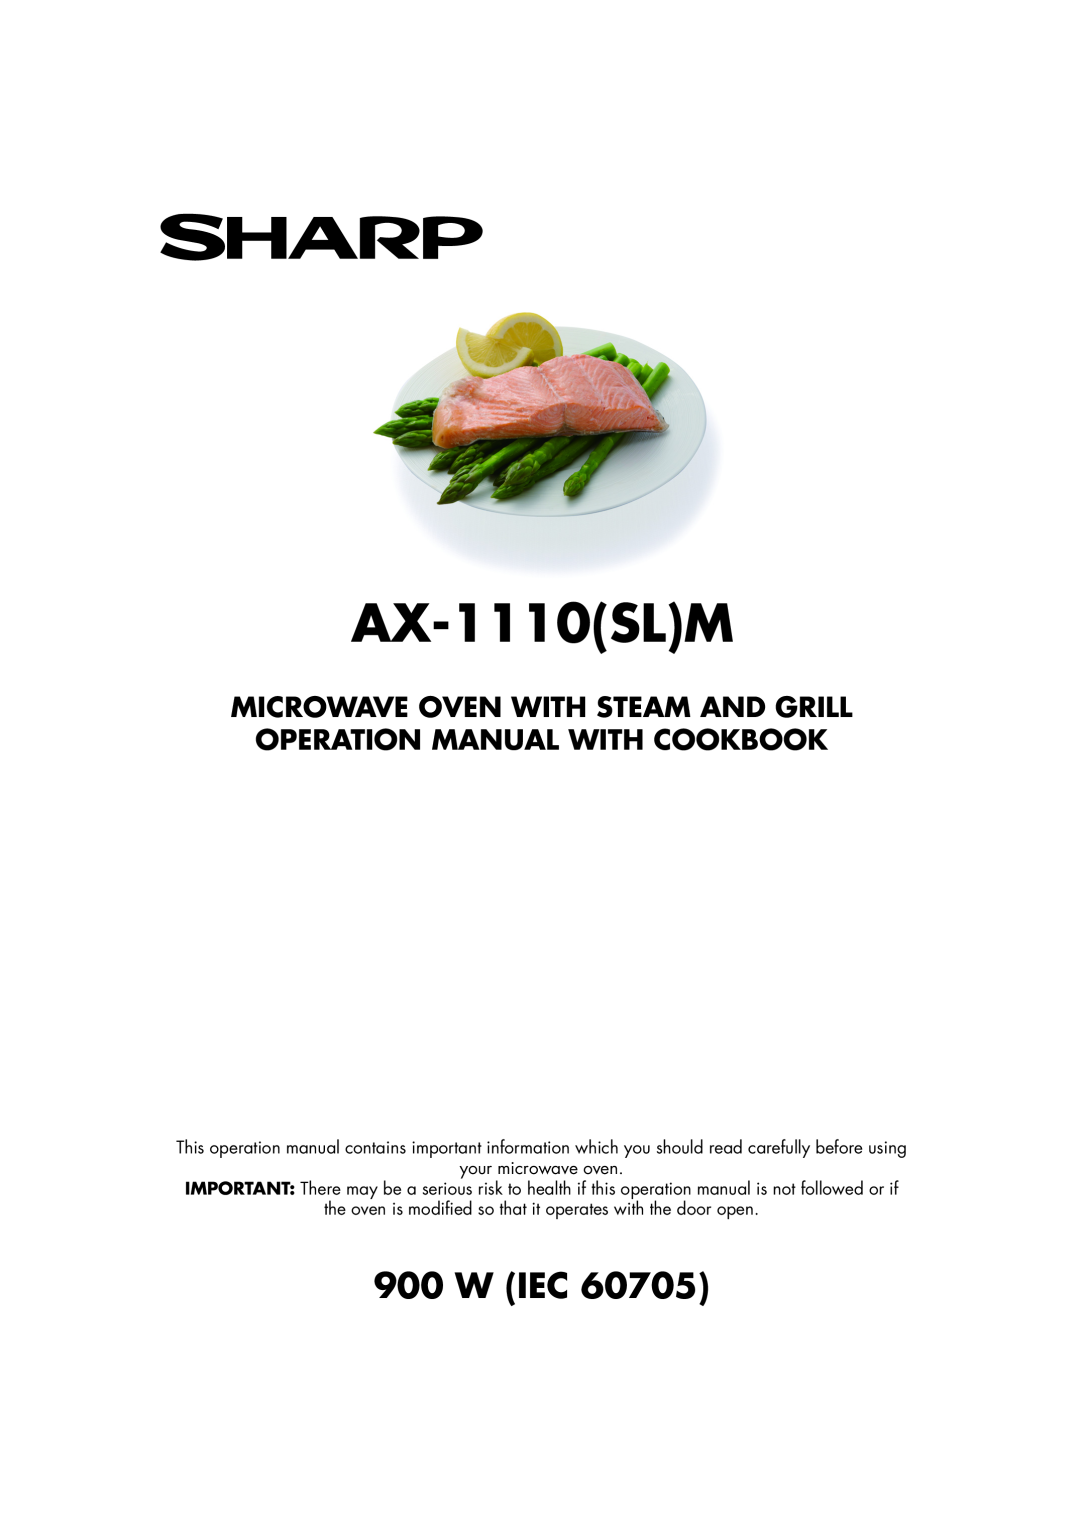 Sharp AX-1110(SL)M manual Microwave Oven With Steam And Grill Operation Manual With Cookbook, AX-1110SLM, W Iec 